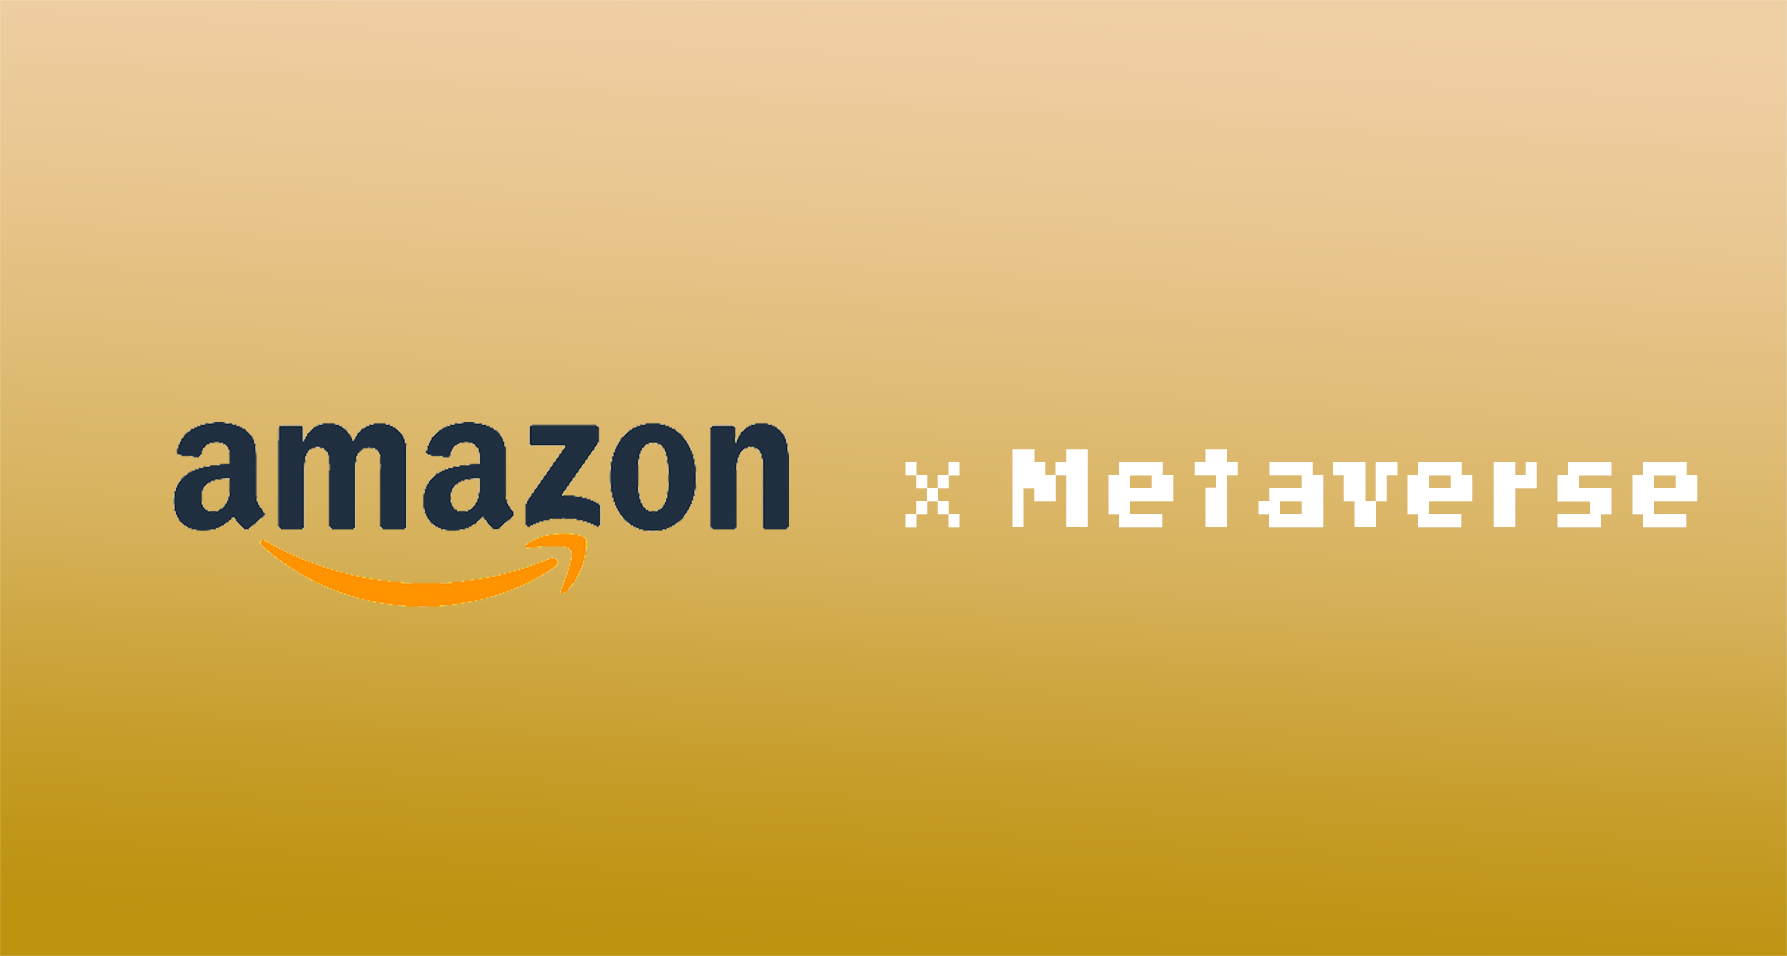 What is the Amazon’s Metaverse?